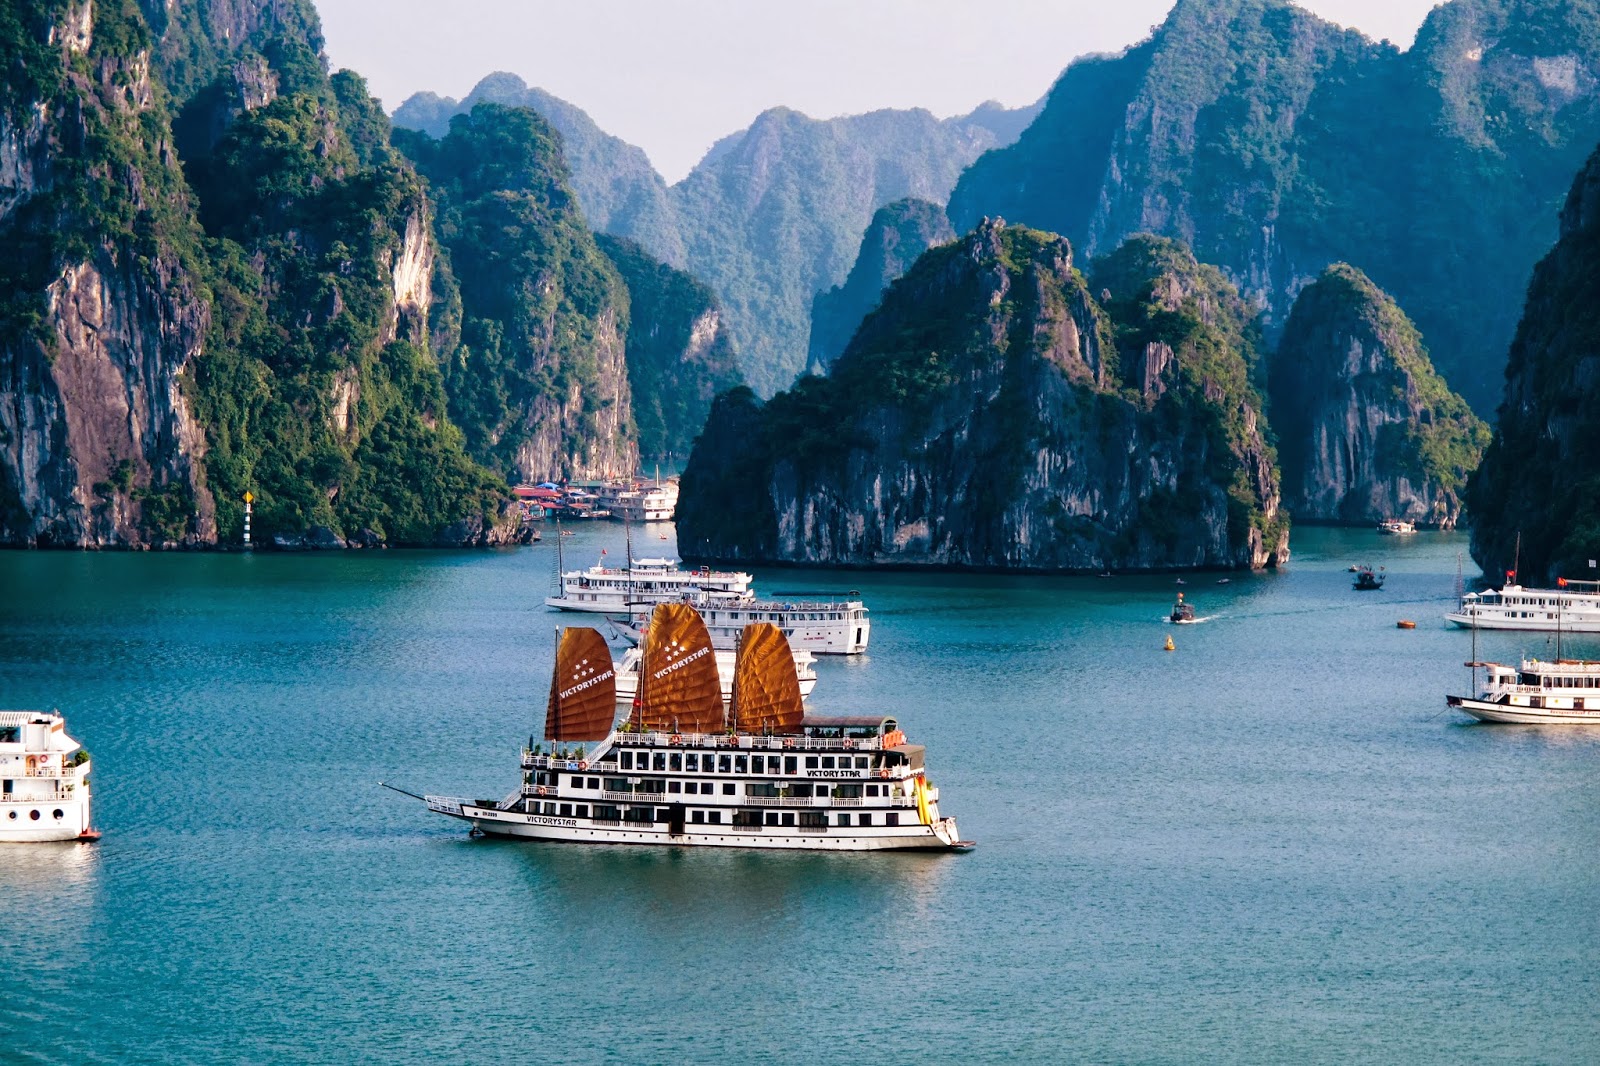 Come and experience the breathtaking beauty of Halong Bay, Vietnam with us